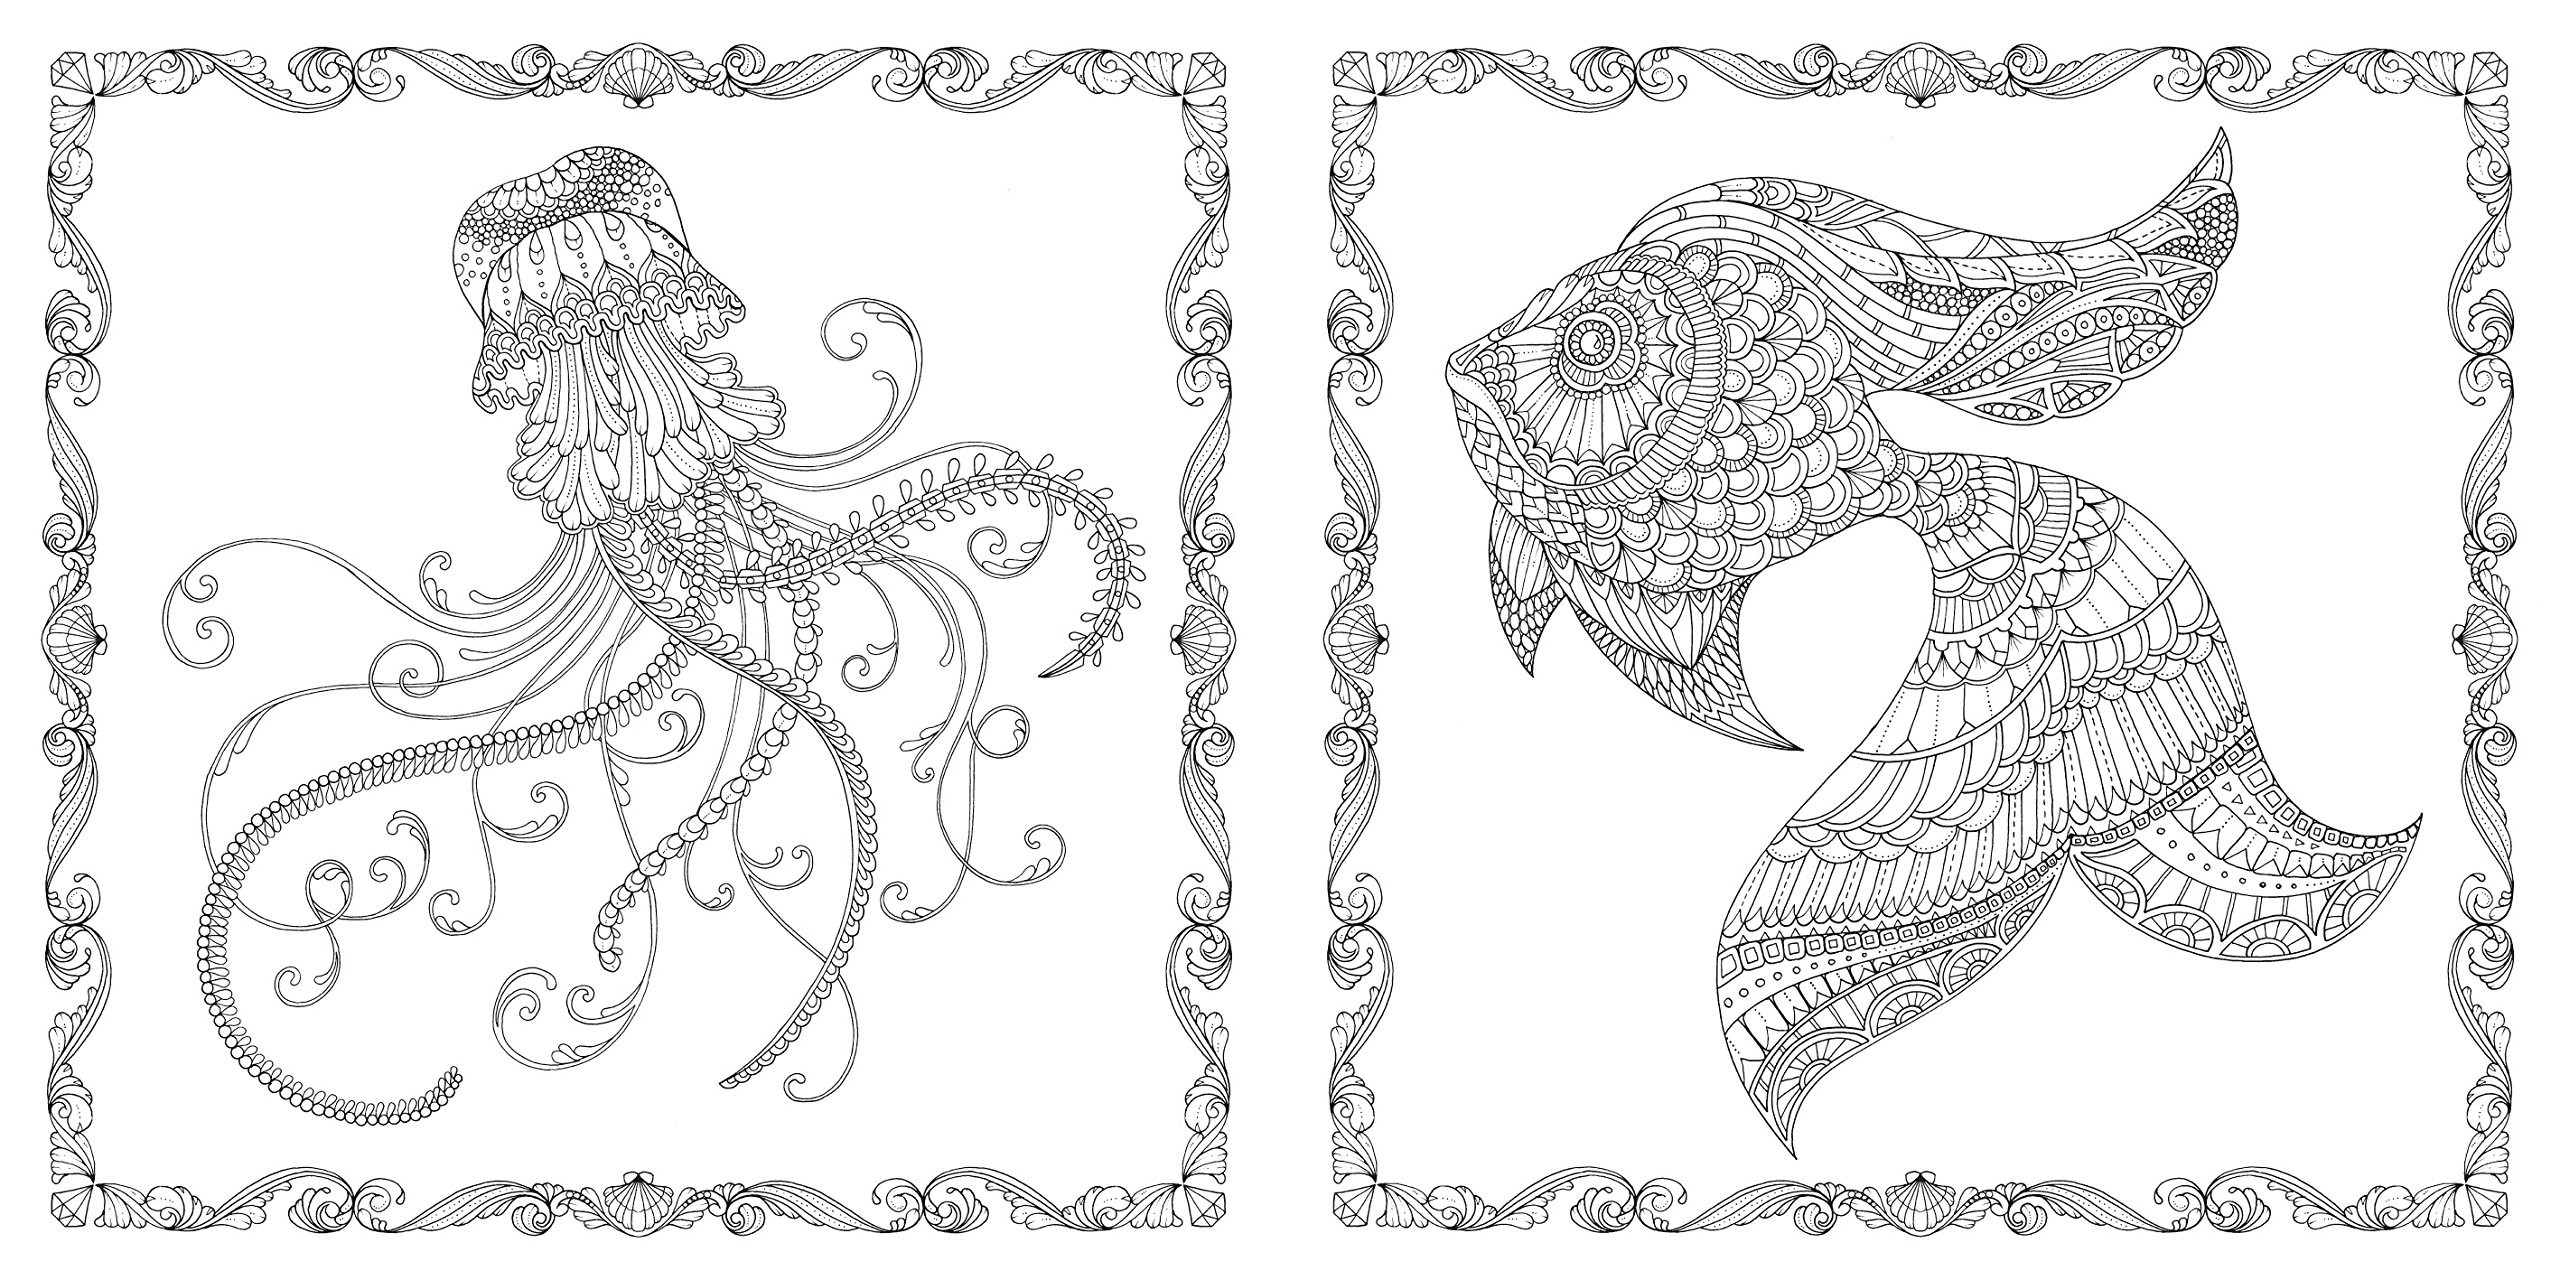 Johanna Basford Coloring Pages
 Lost Ocean An Inky Adventure & Colouring Book by Johanna